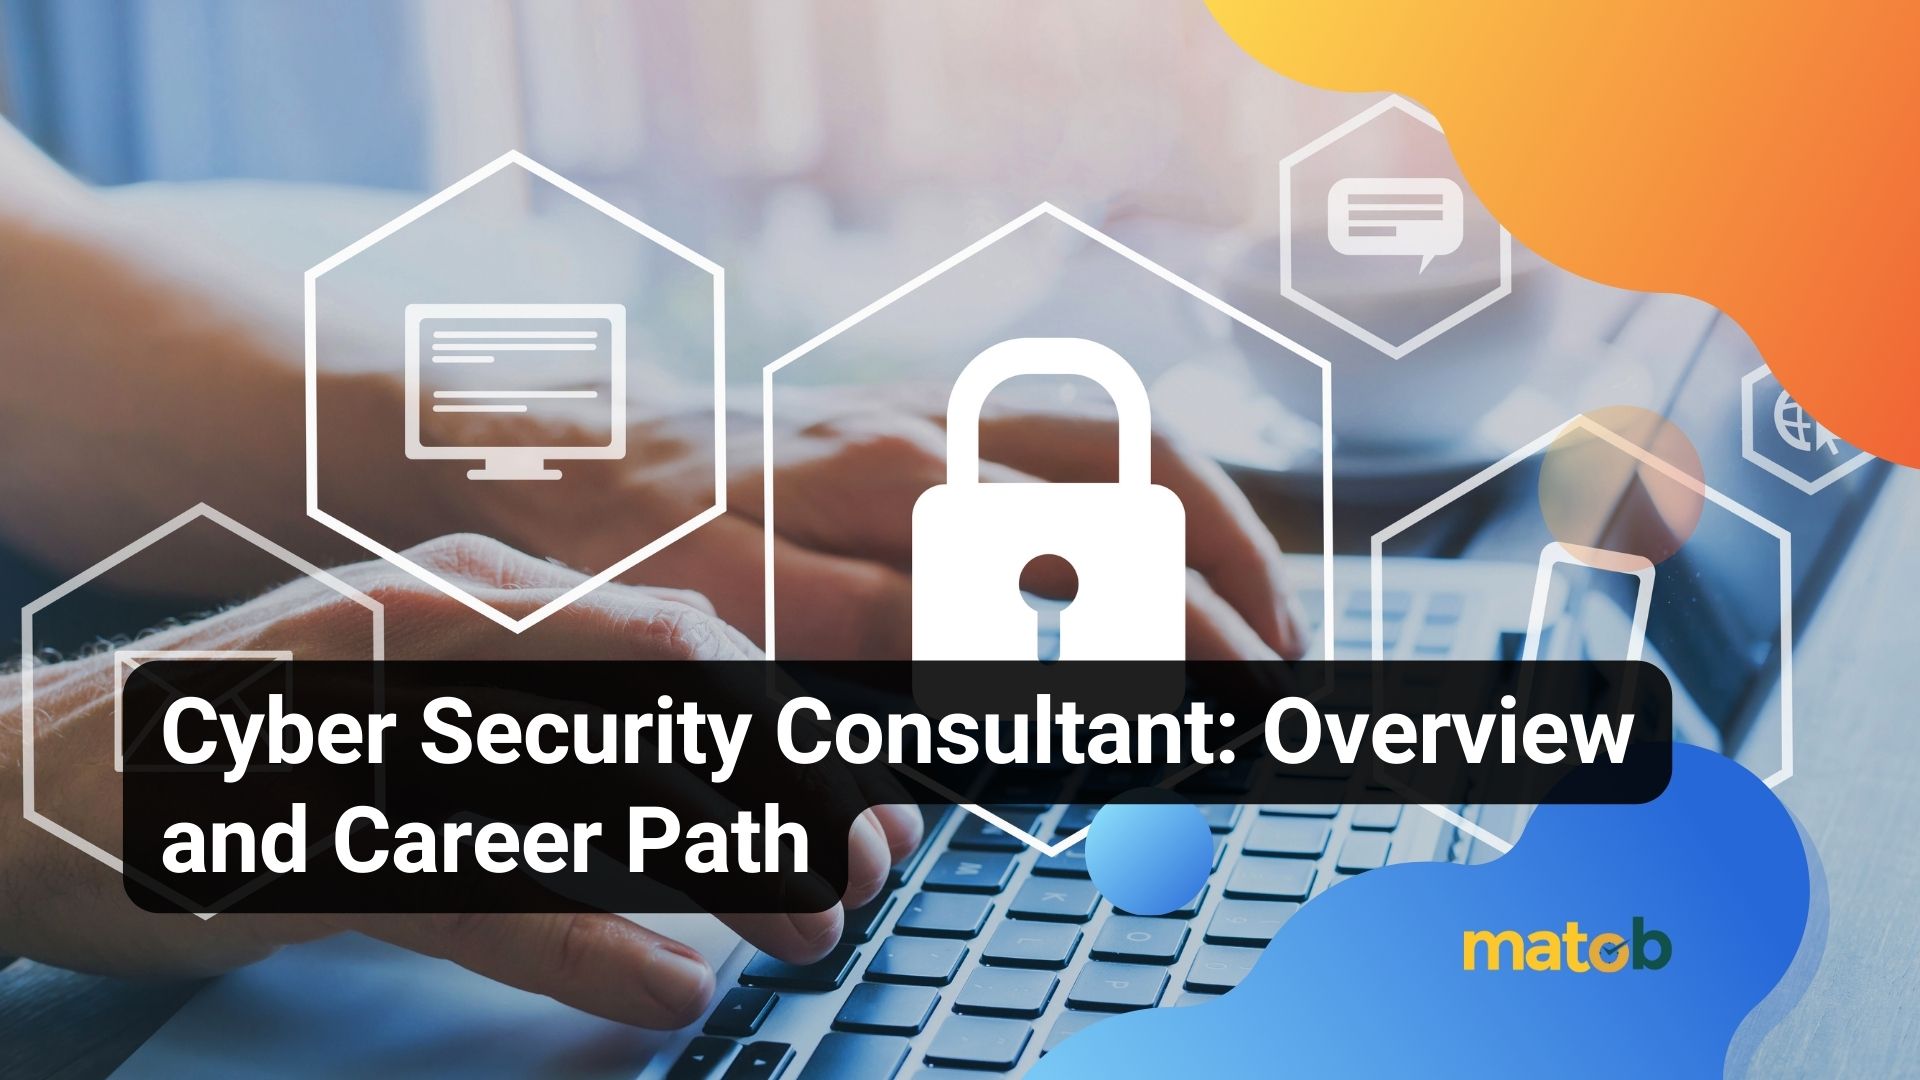 Cyber Security Consultant: Overview and Career Path